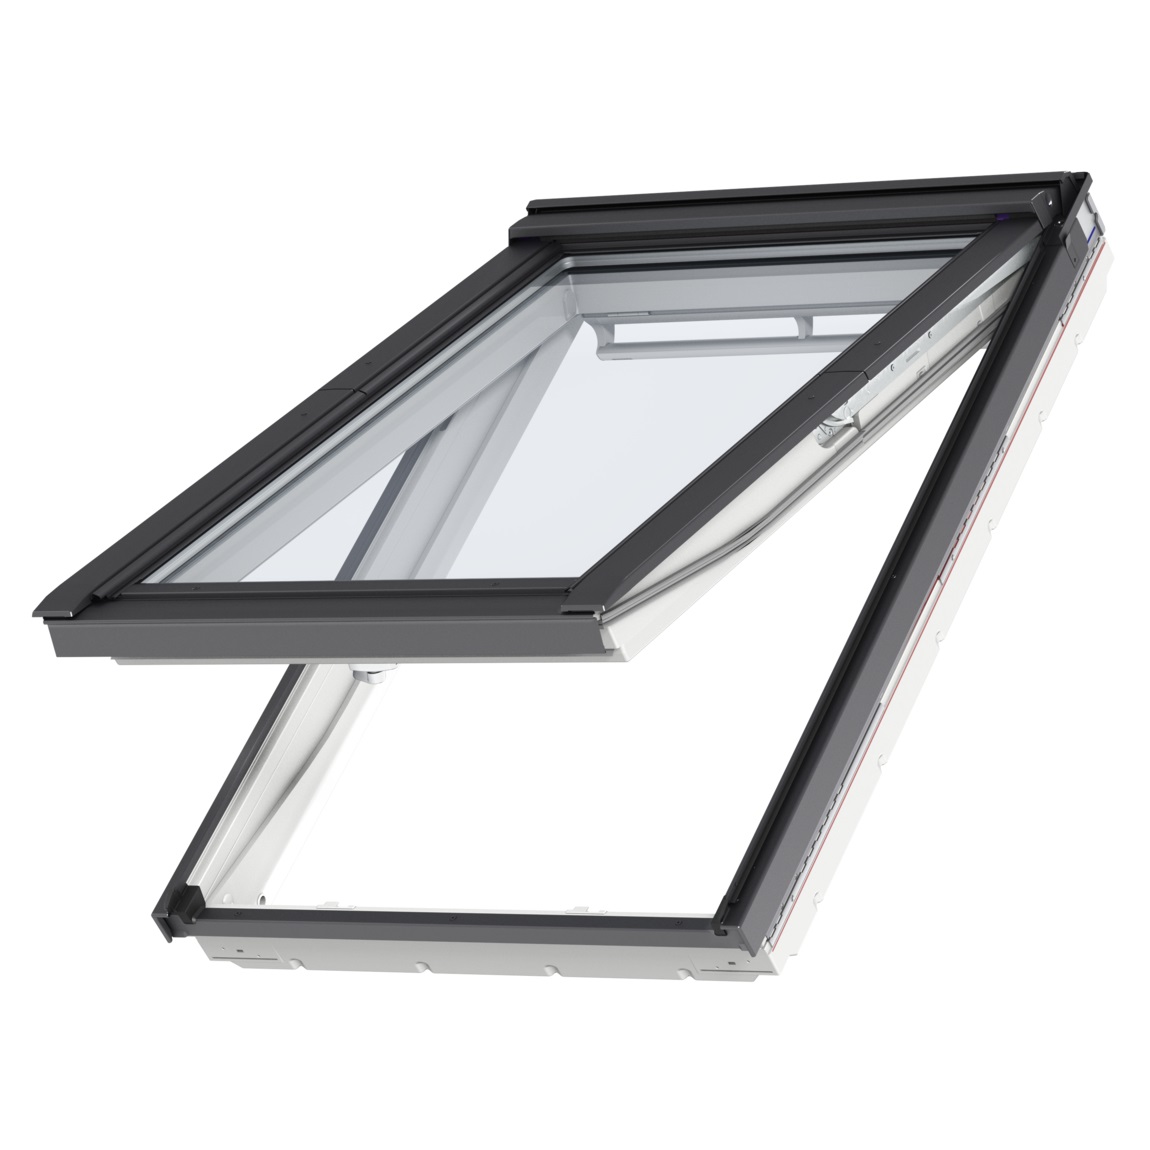 VELUX Top-Hung Roof Windows